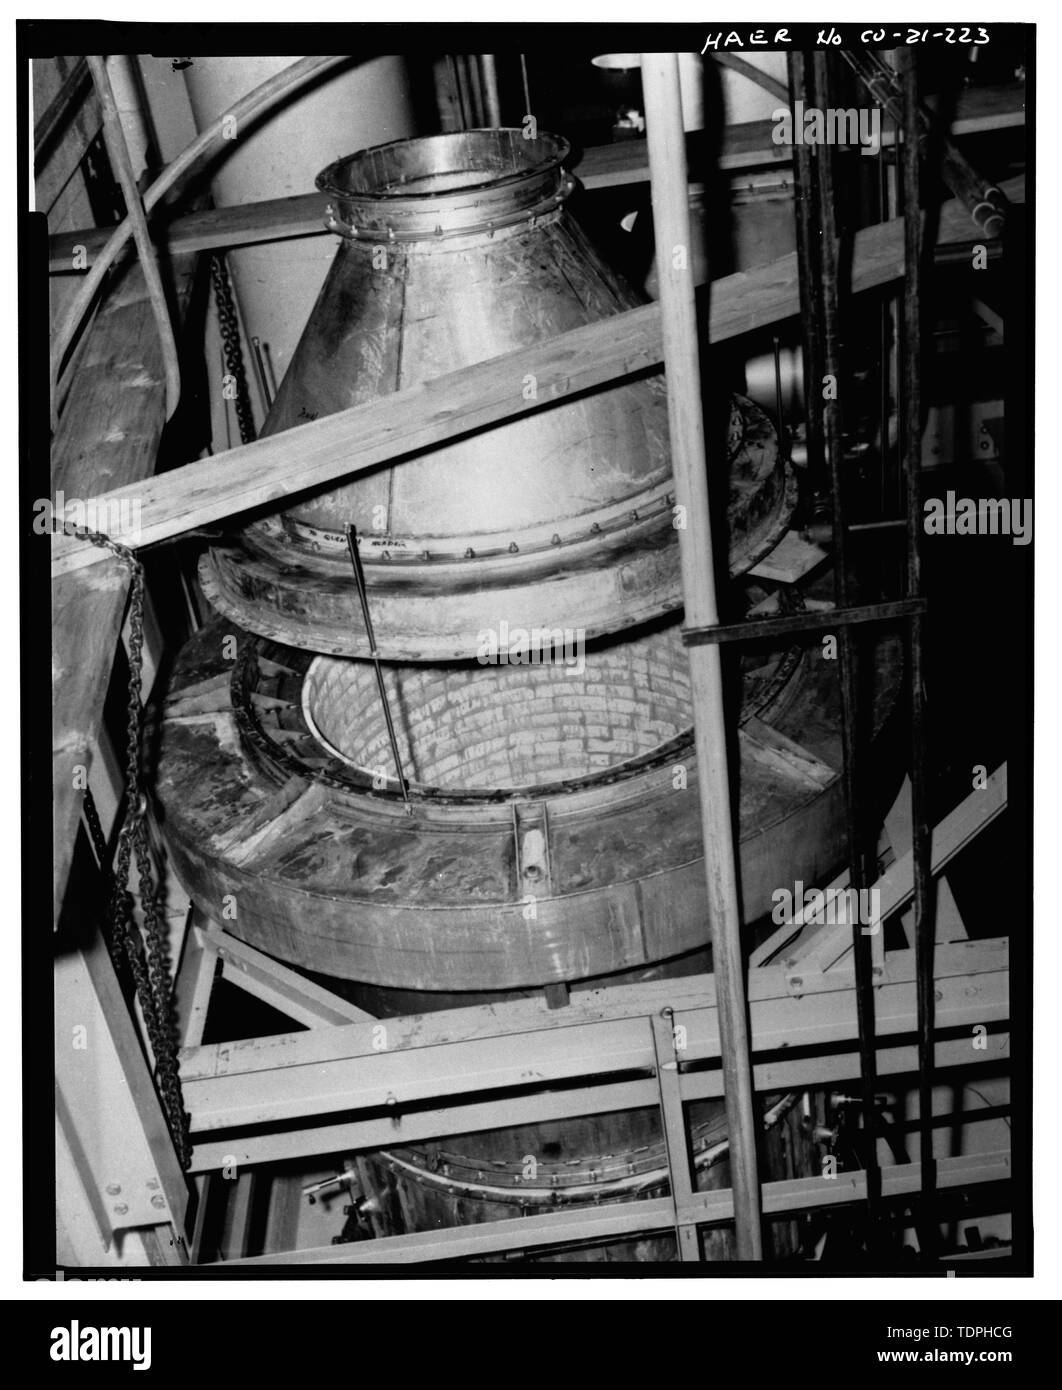 Incinerator Black and White Stock Photos & Images - Alamy